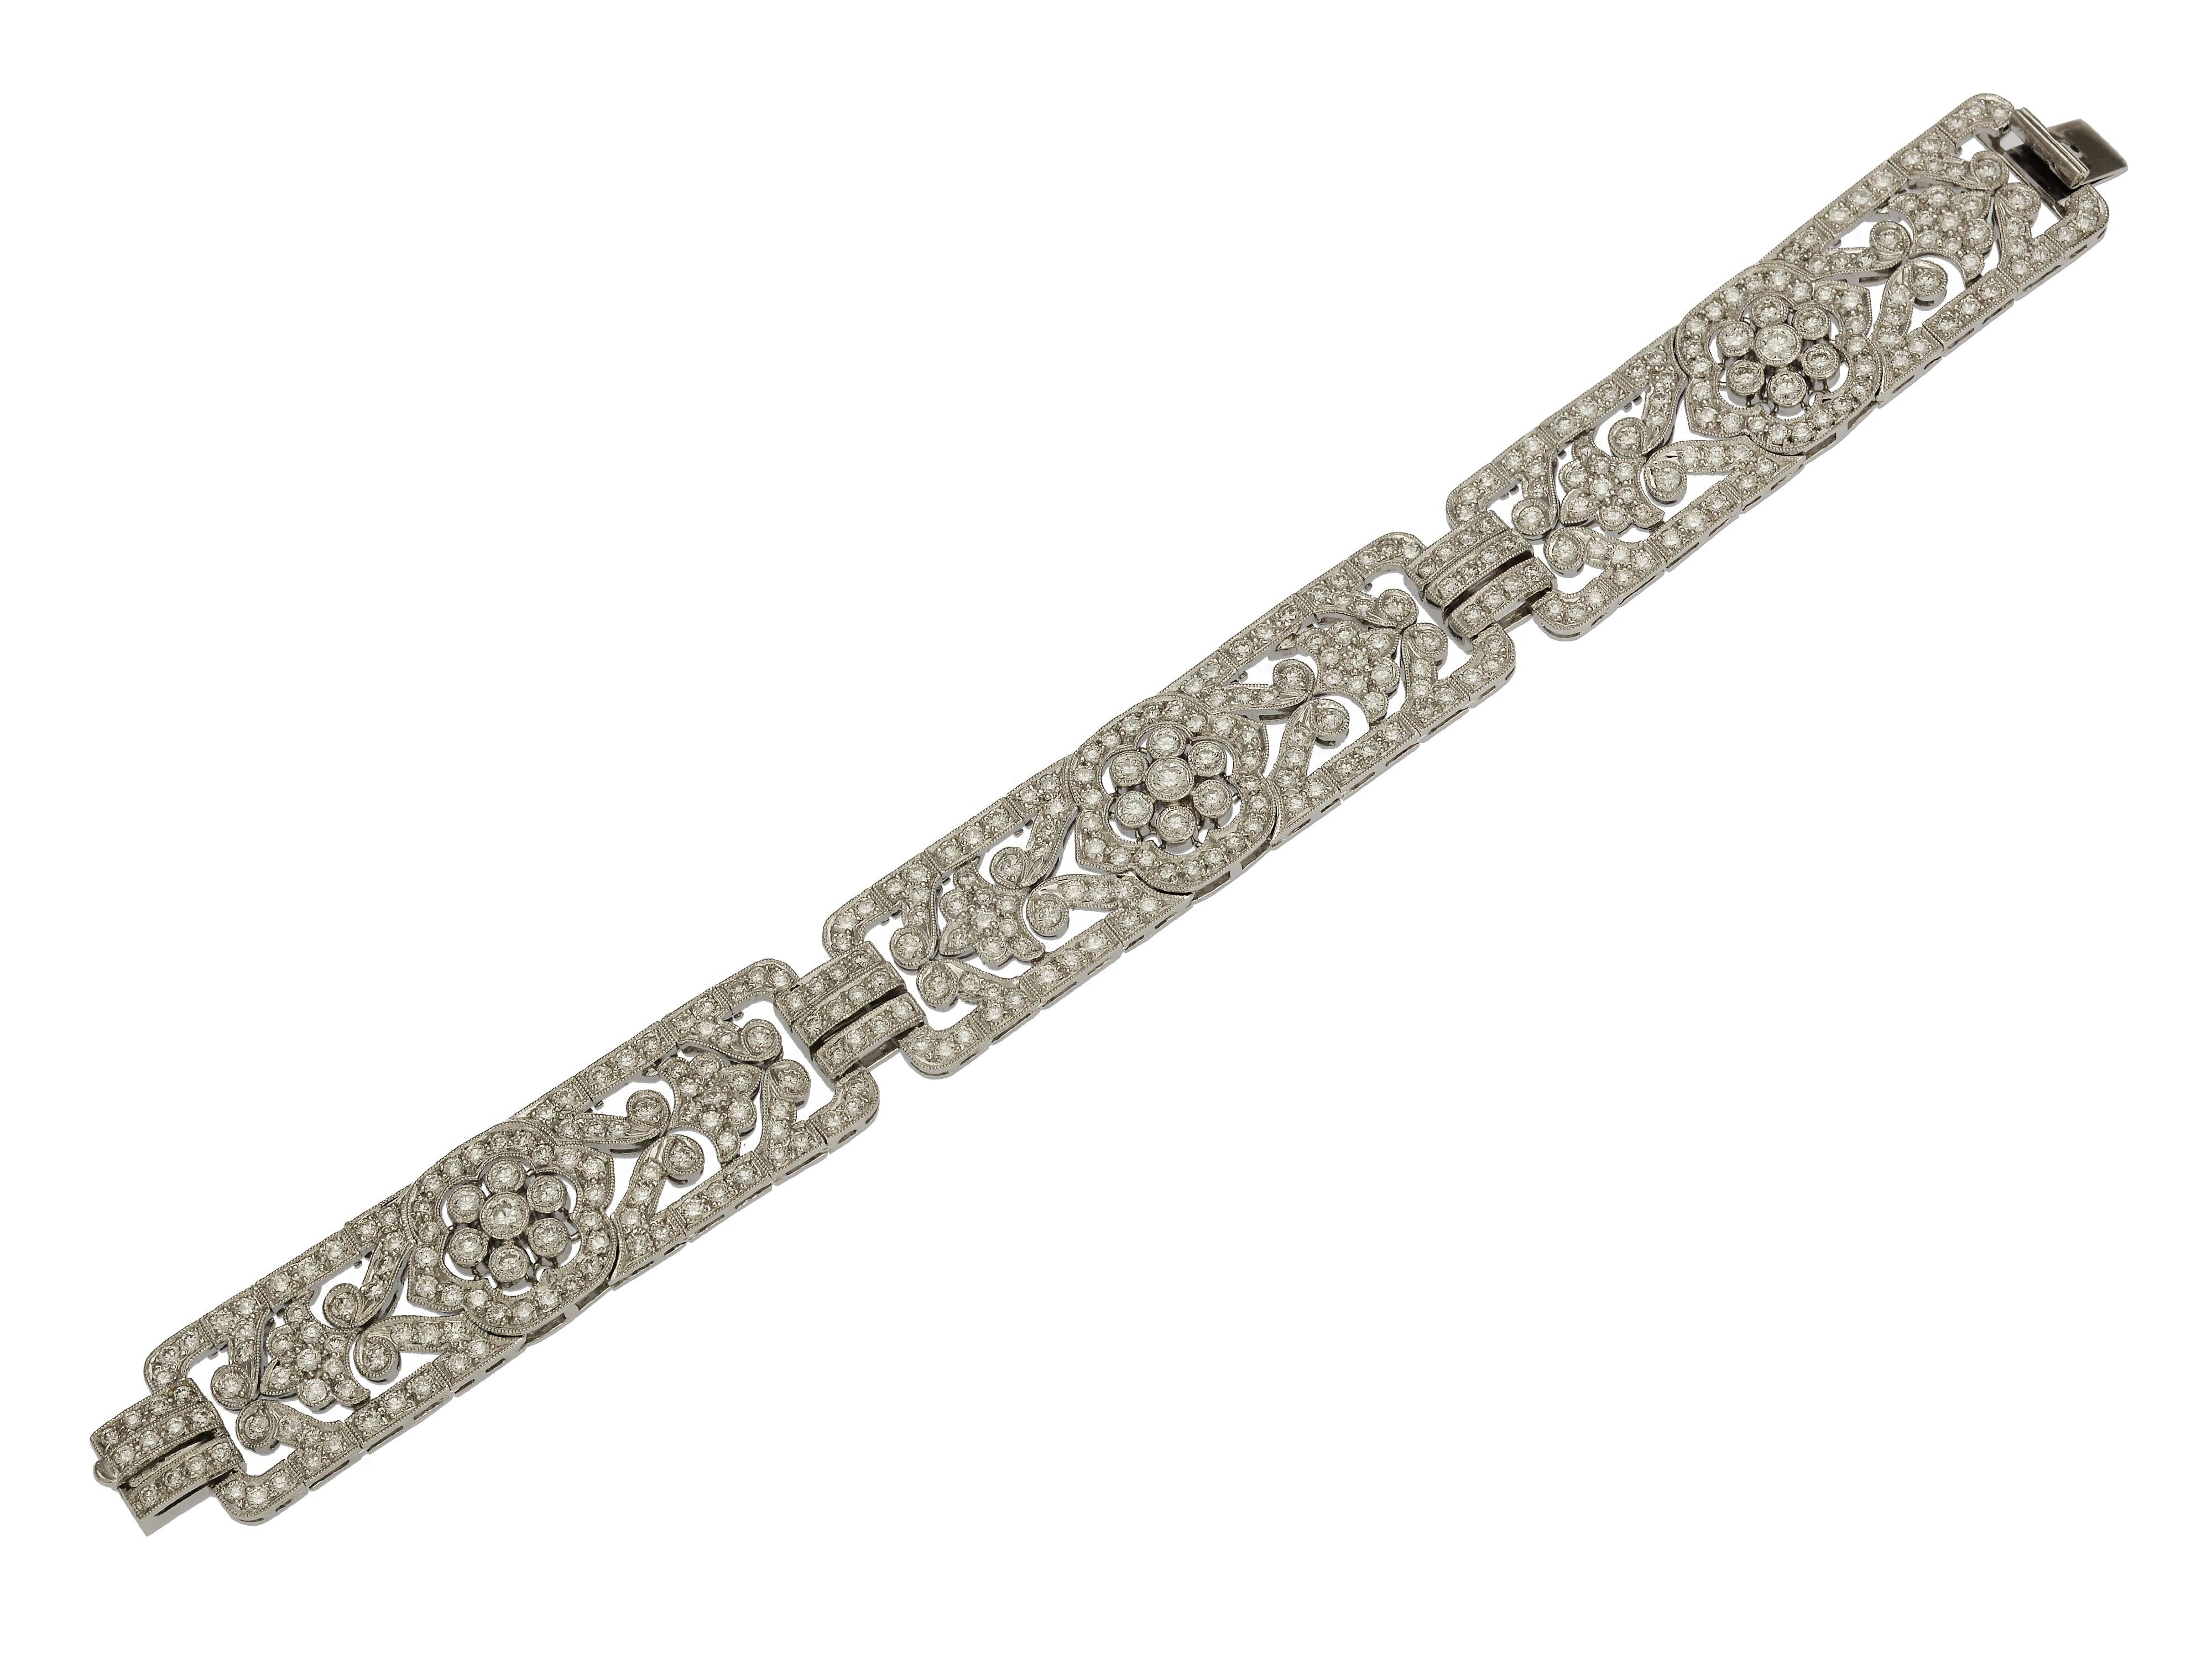 New Elegant 18 Karat White Gold Diamond Bracelet. The Vintage Inspired Design is Arranged in a 3 Piece Flower Pattern with Milgrain Detail on the Metal Edges. Prong and Bezel Set Round Brilliant Cut Diamonds of SI Clarity & H Color Total 6.86